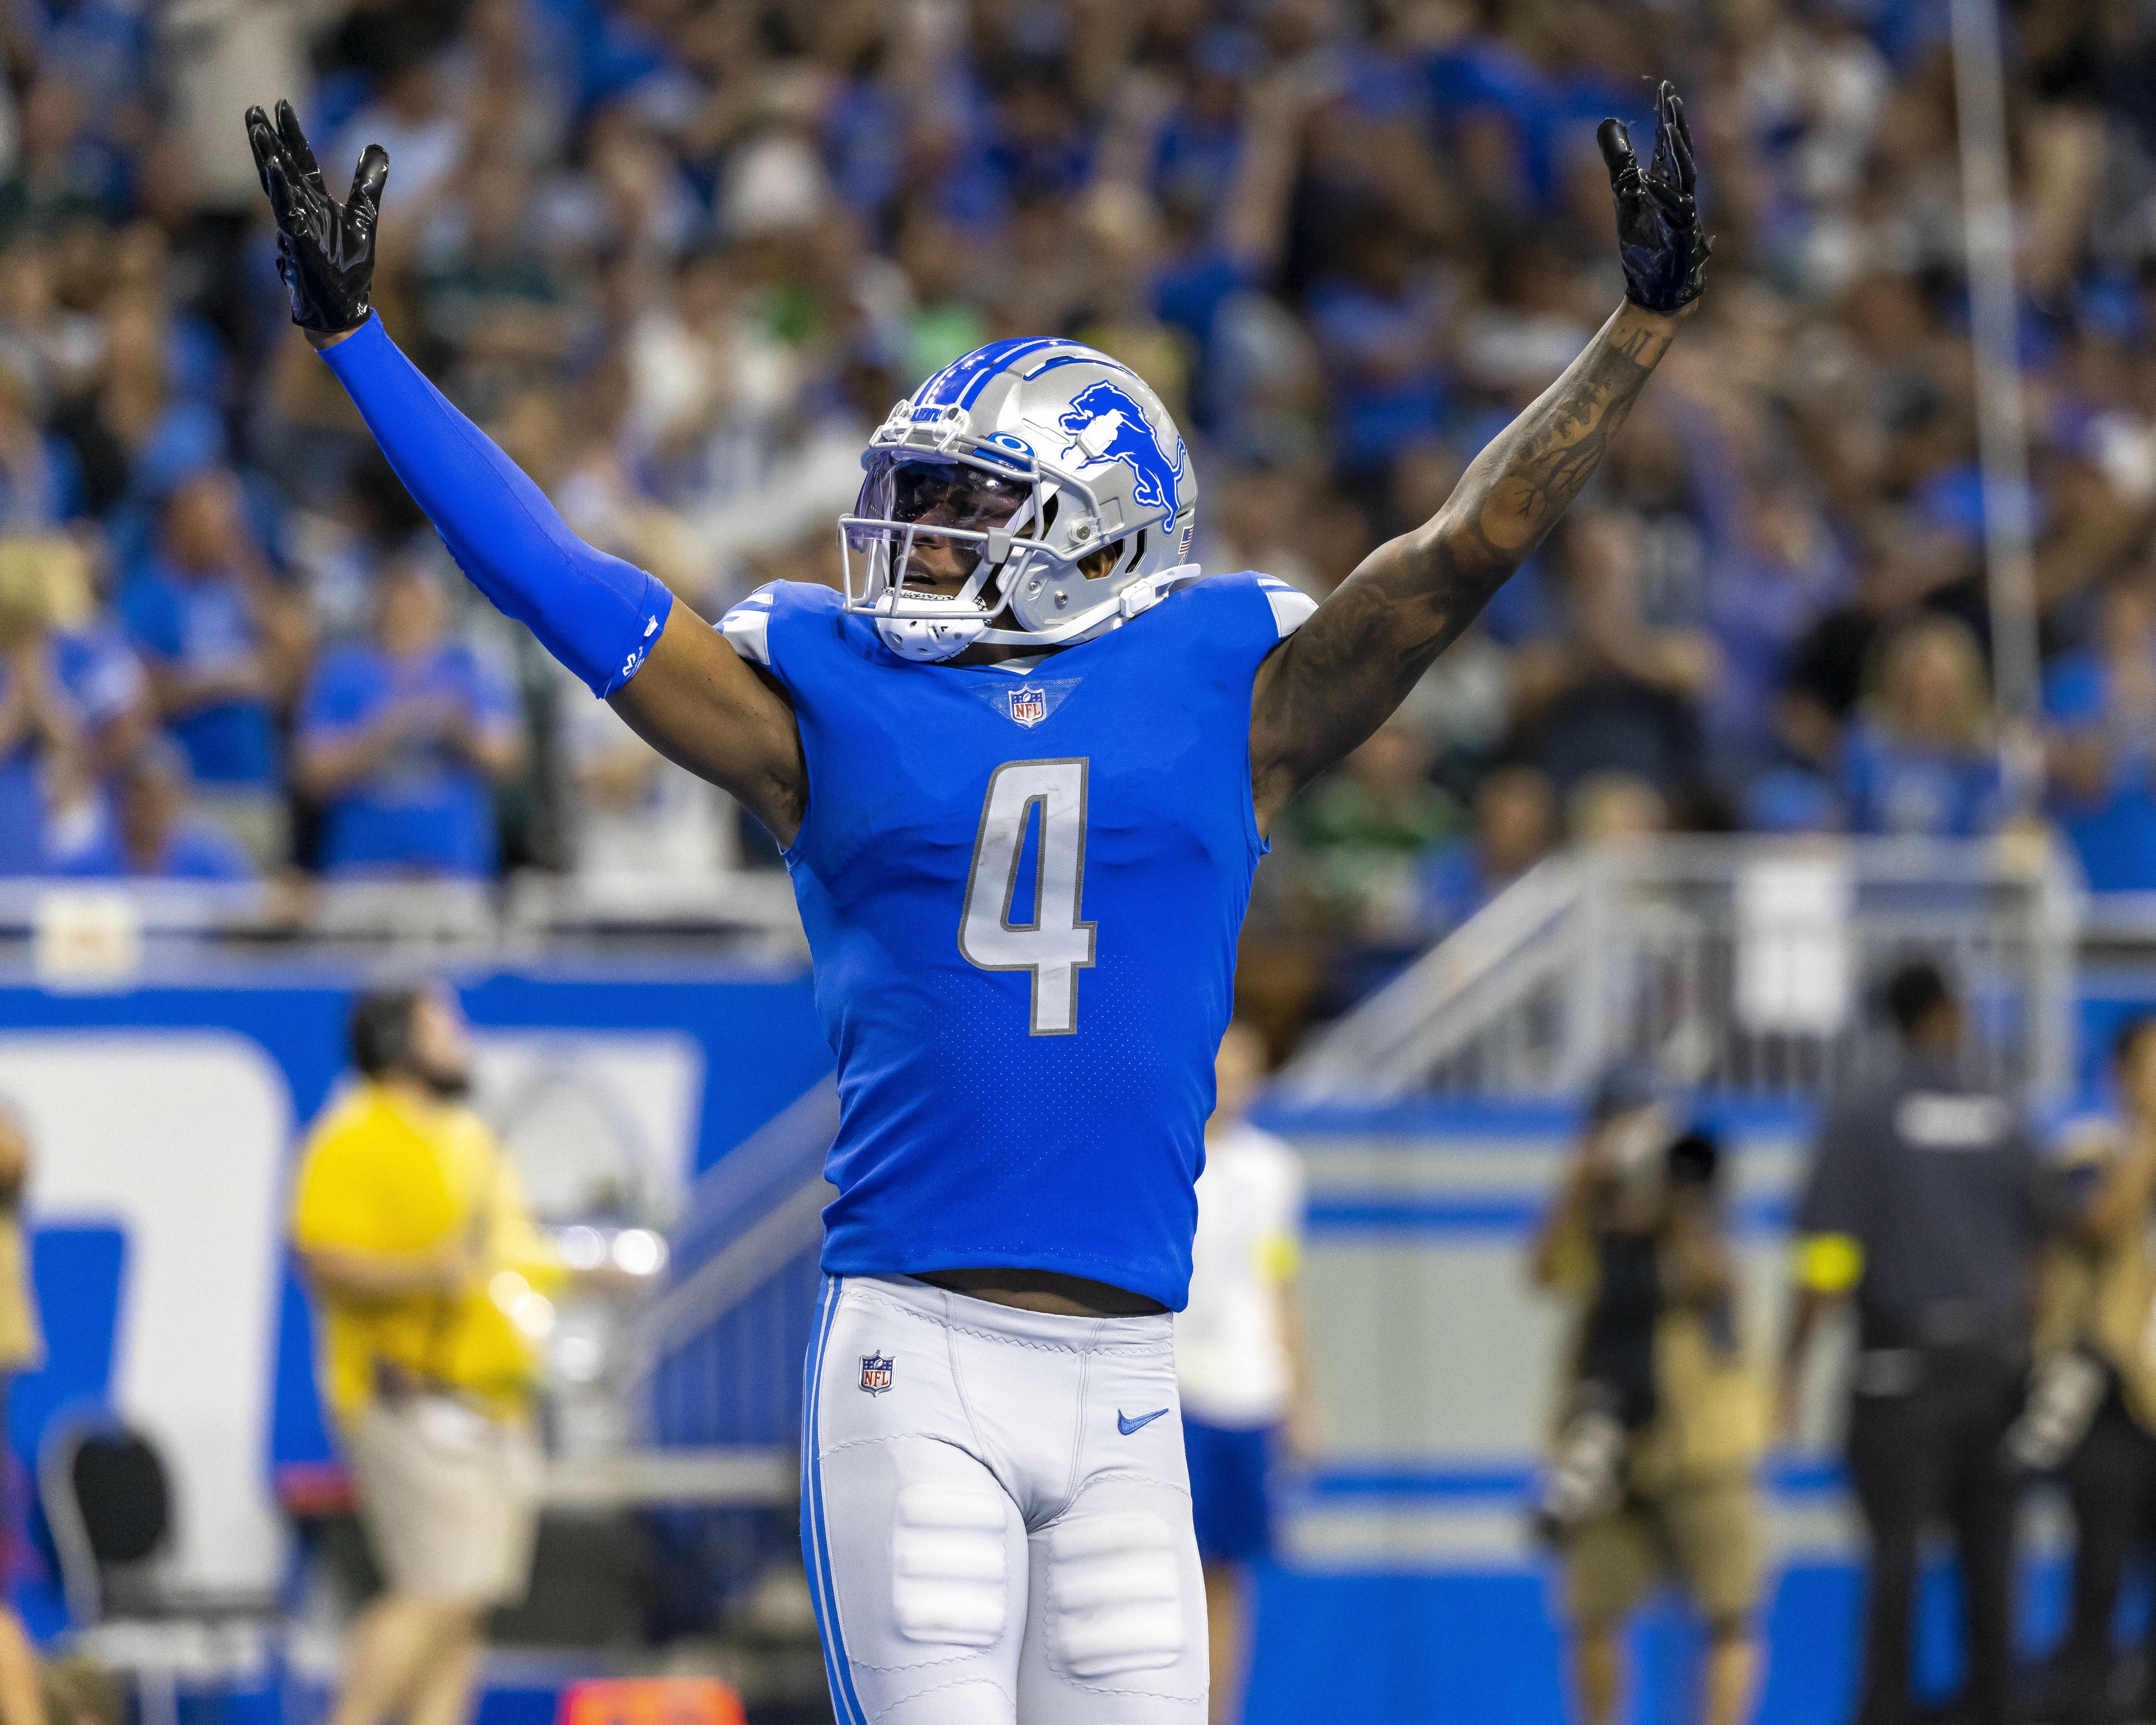 How To Watch Seahawks vs. Lions Week 2 NFL Game: TV, Betting Info